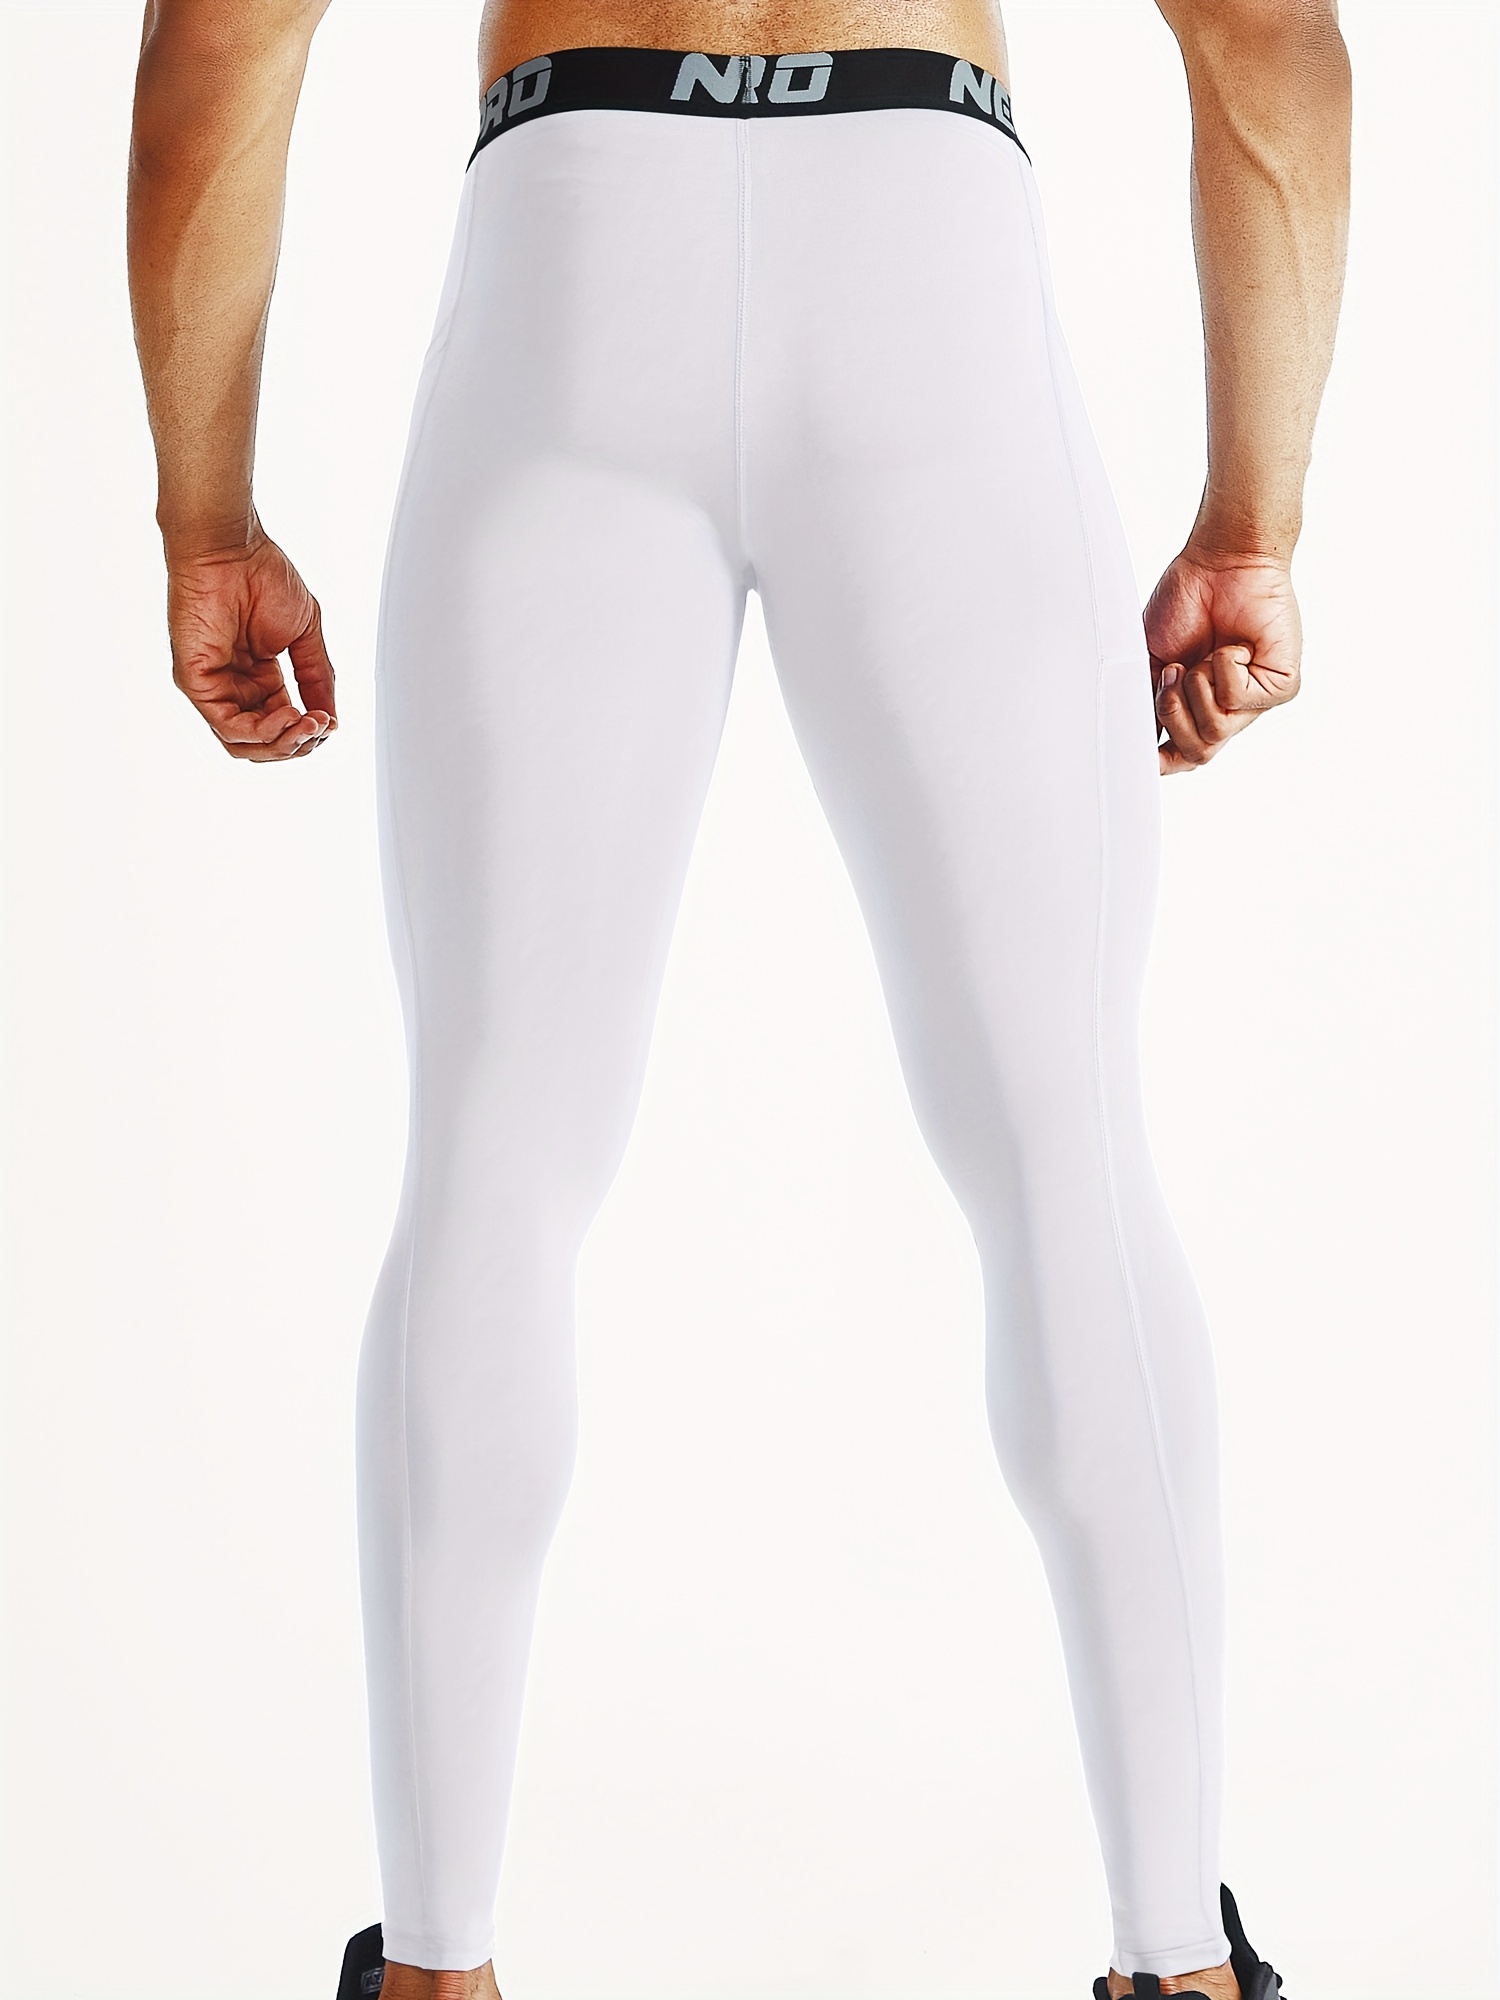 Men's Cool Dry Compression Pants- Active Workout Leggings Gym Tights  Pocket- Sports Pant for Running Yoga Basketball White Medium